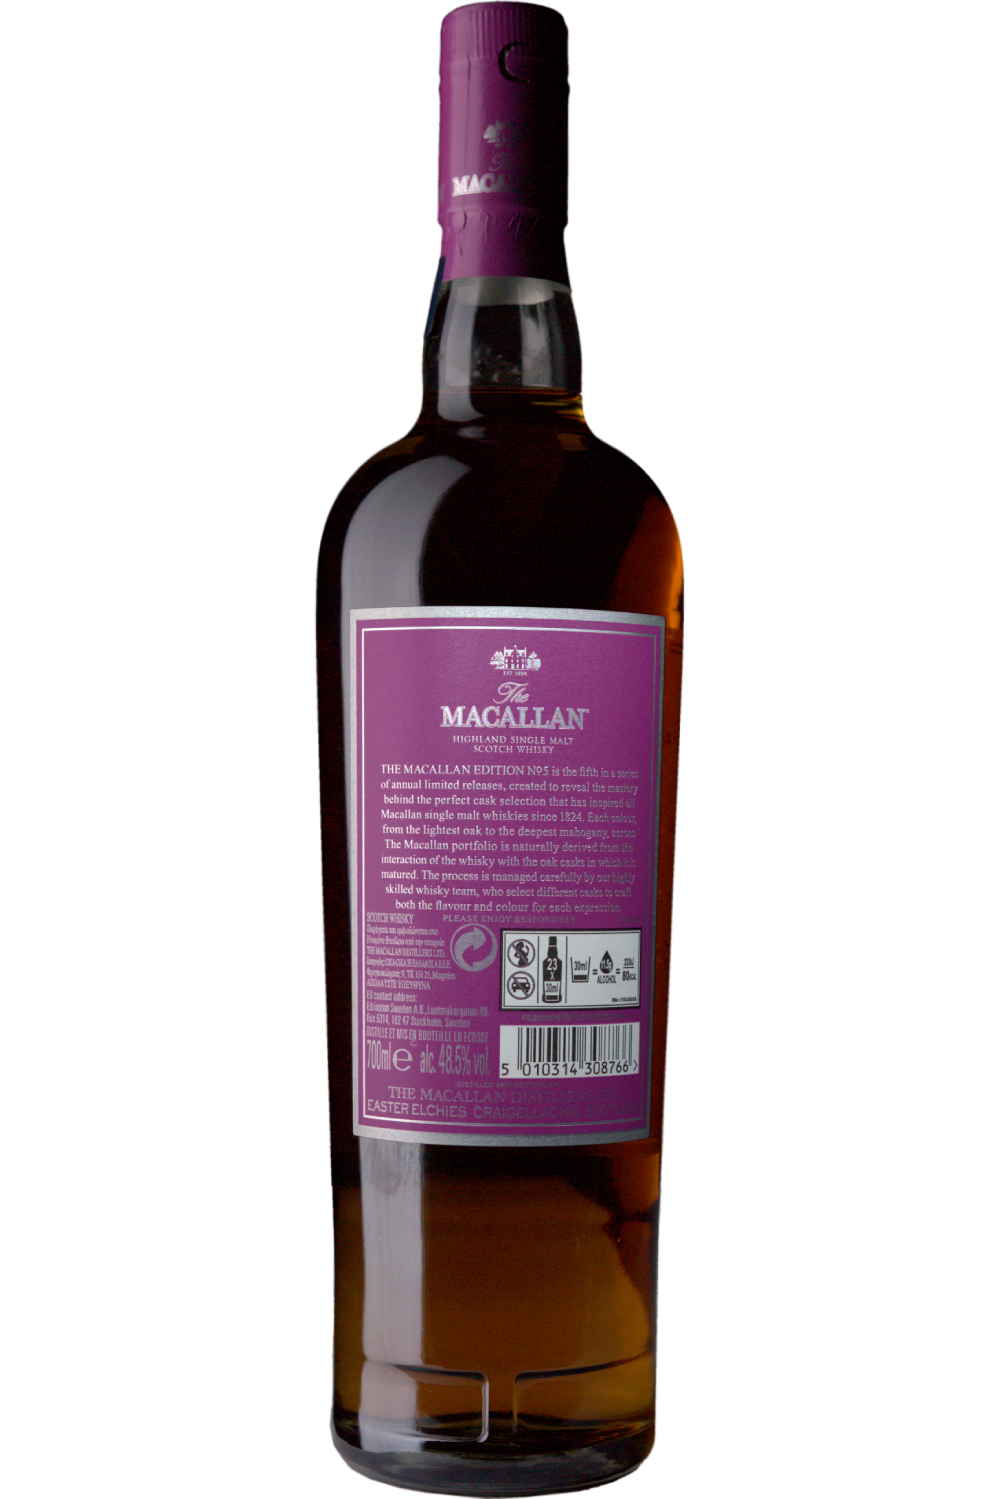 WineVins The Macallan Edition N.º 5 Whisky